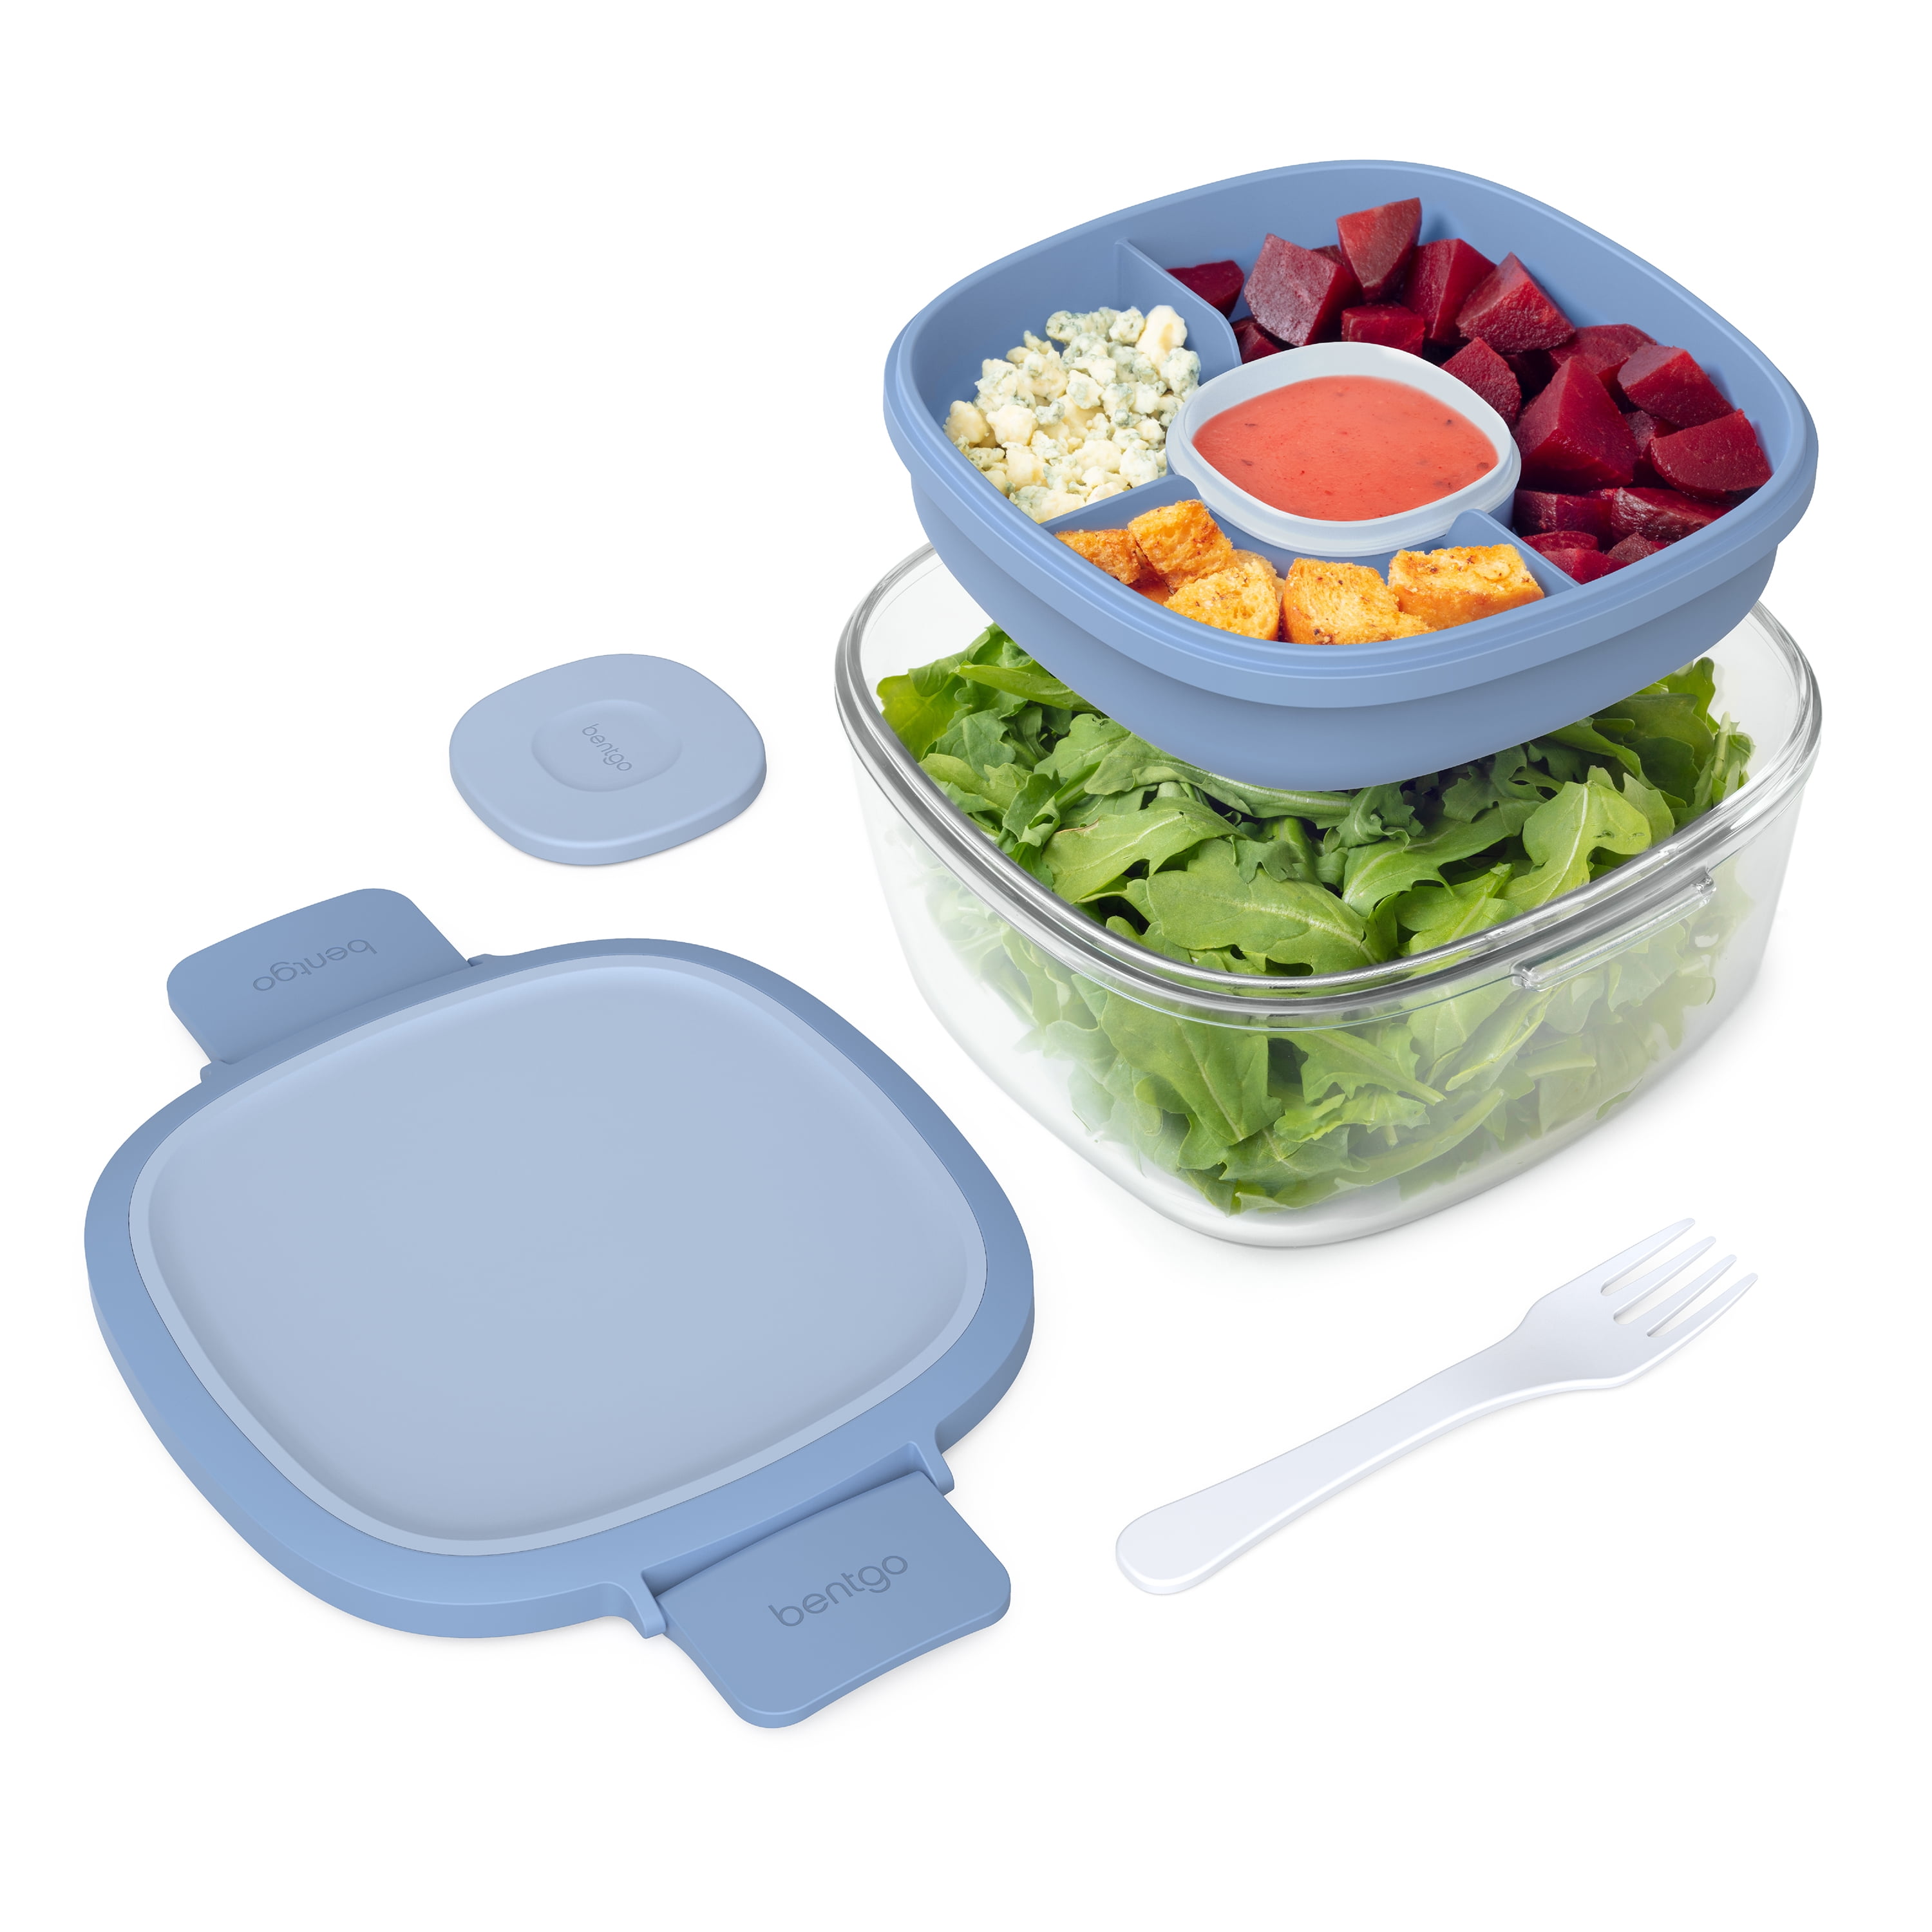 Large 52 oz. Salad Lunch Container, Salad Bowl with 3-compartments, 2-oz. Sauce Container for Dressings and Built-in Stainless Steel Fork and PP Spoon